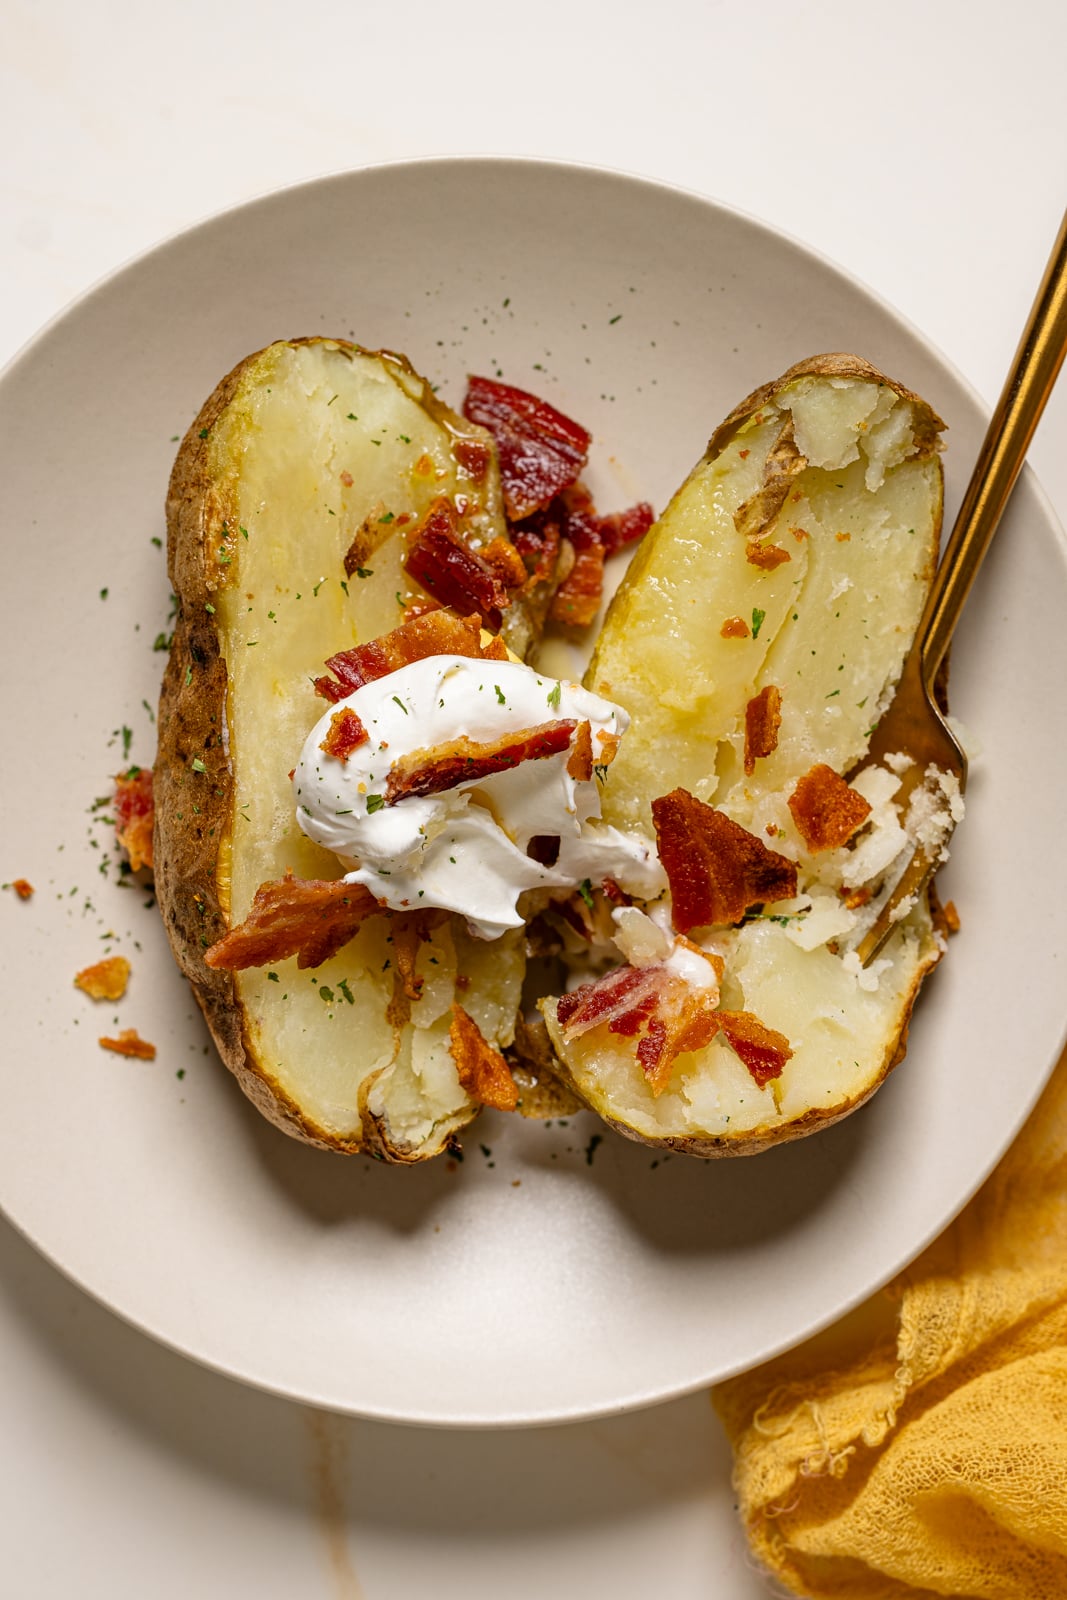 Opened baked potato on a plate with bacon and sour cream with a fork.